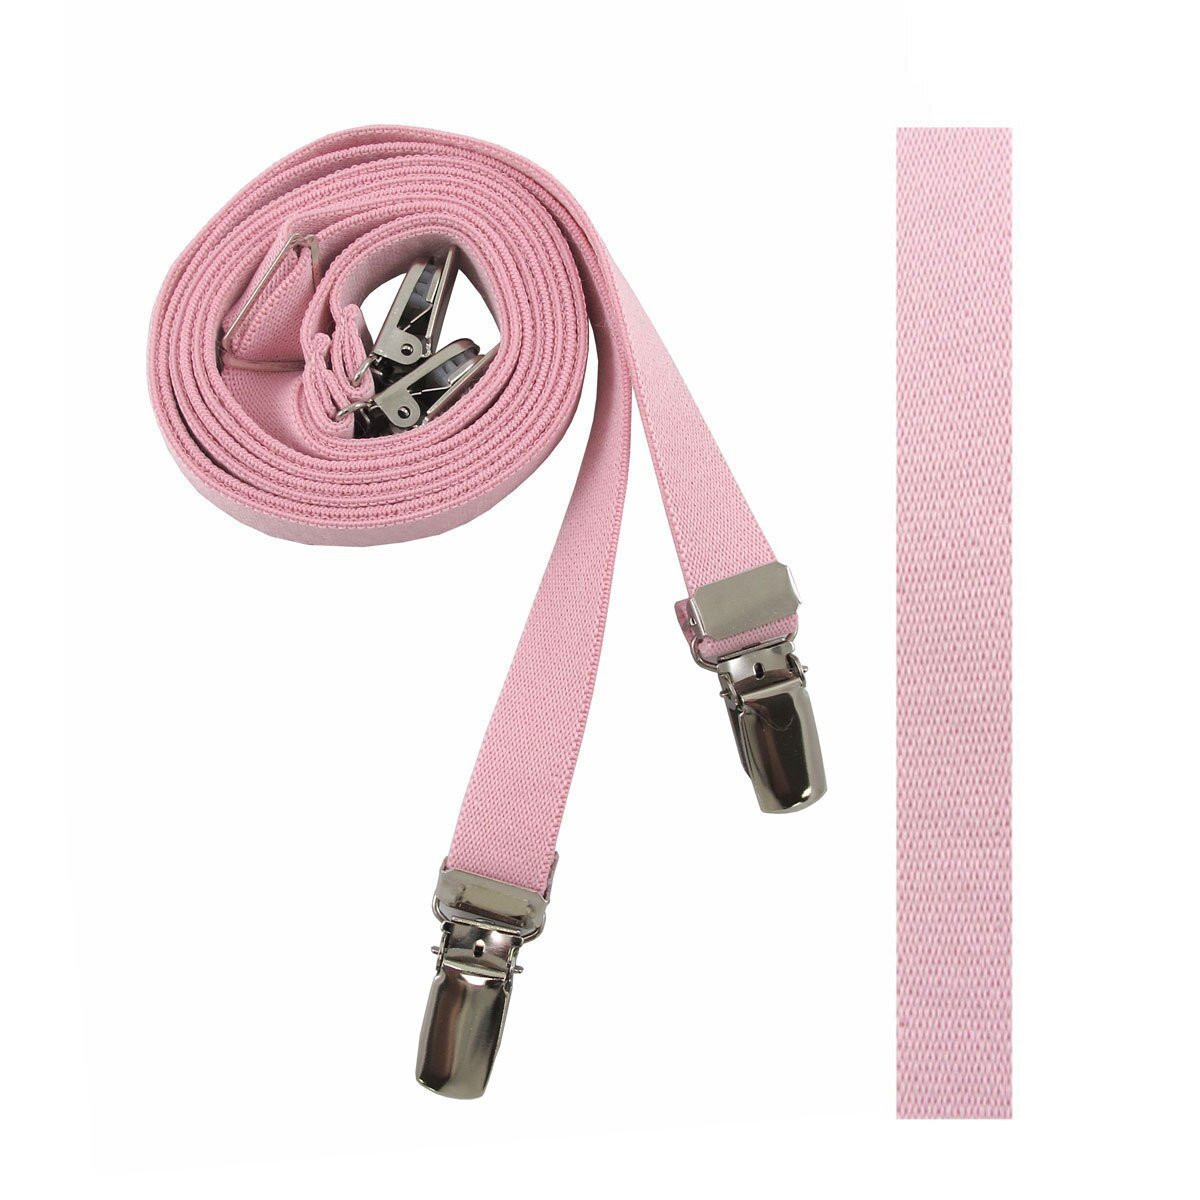 Men's Narrow Solid Suspenders - X-Back - 42 inches Long - 0.75 inch Straps - Pre-Tied Clip-On - Light Pink